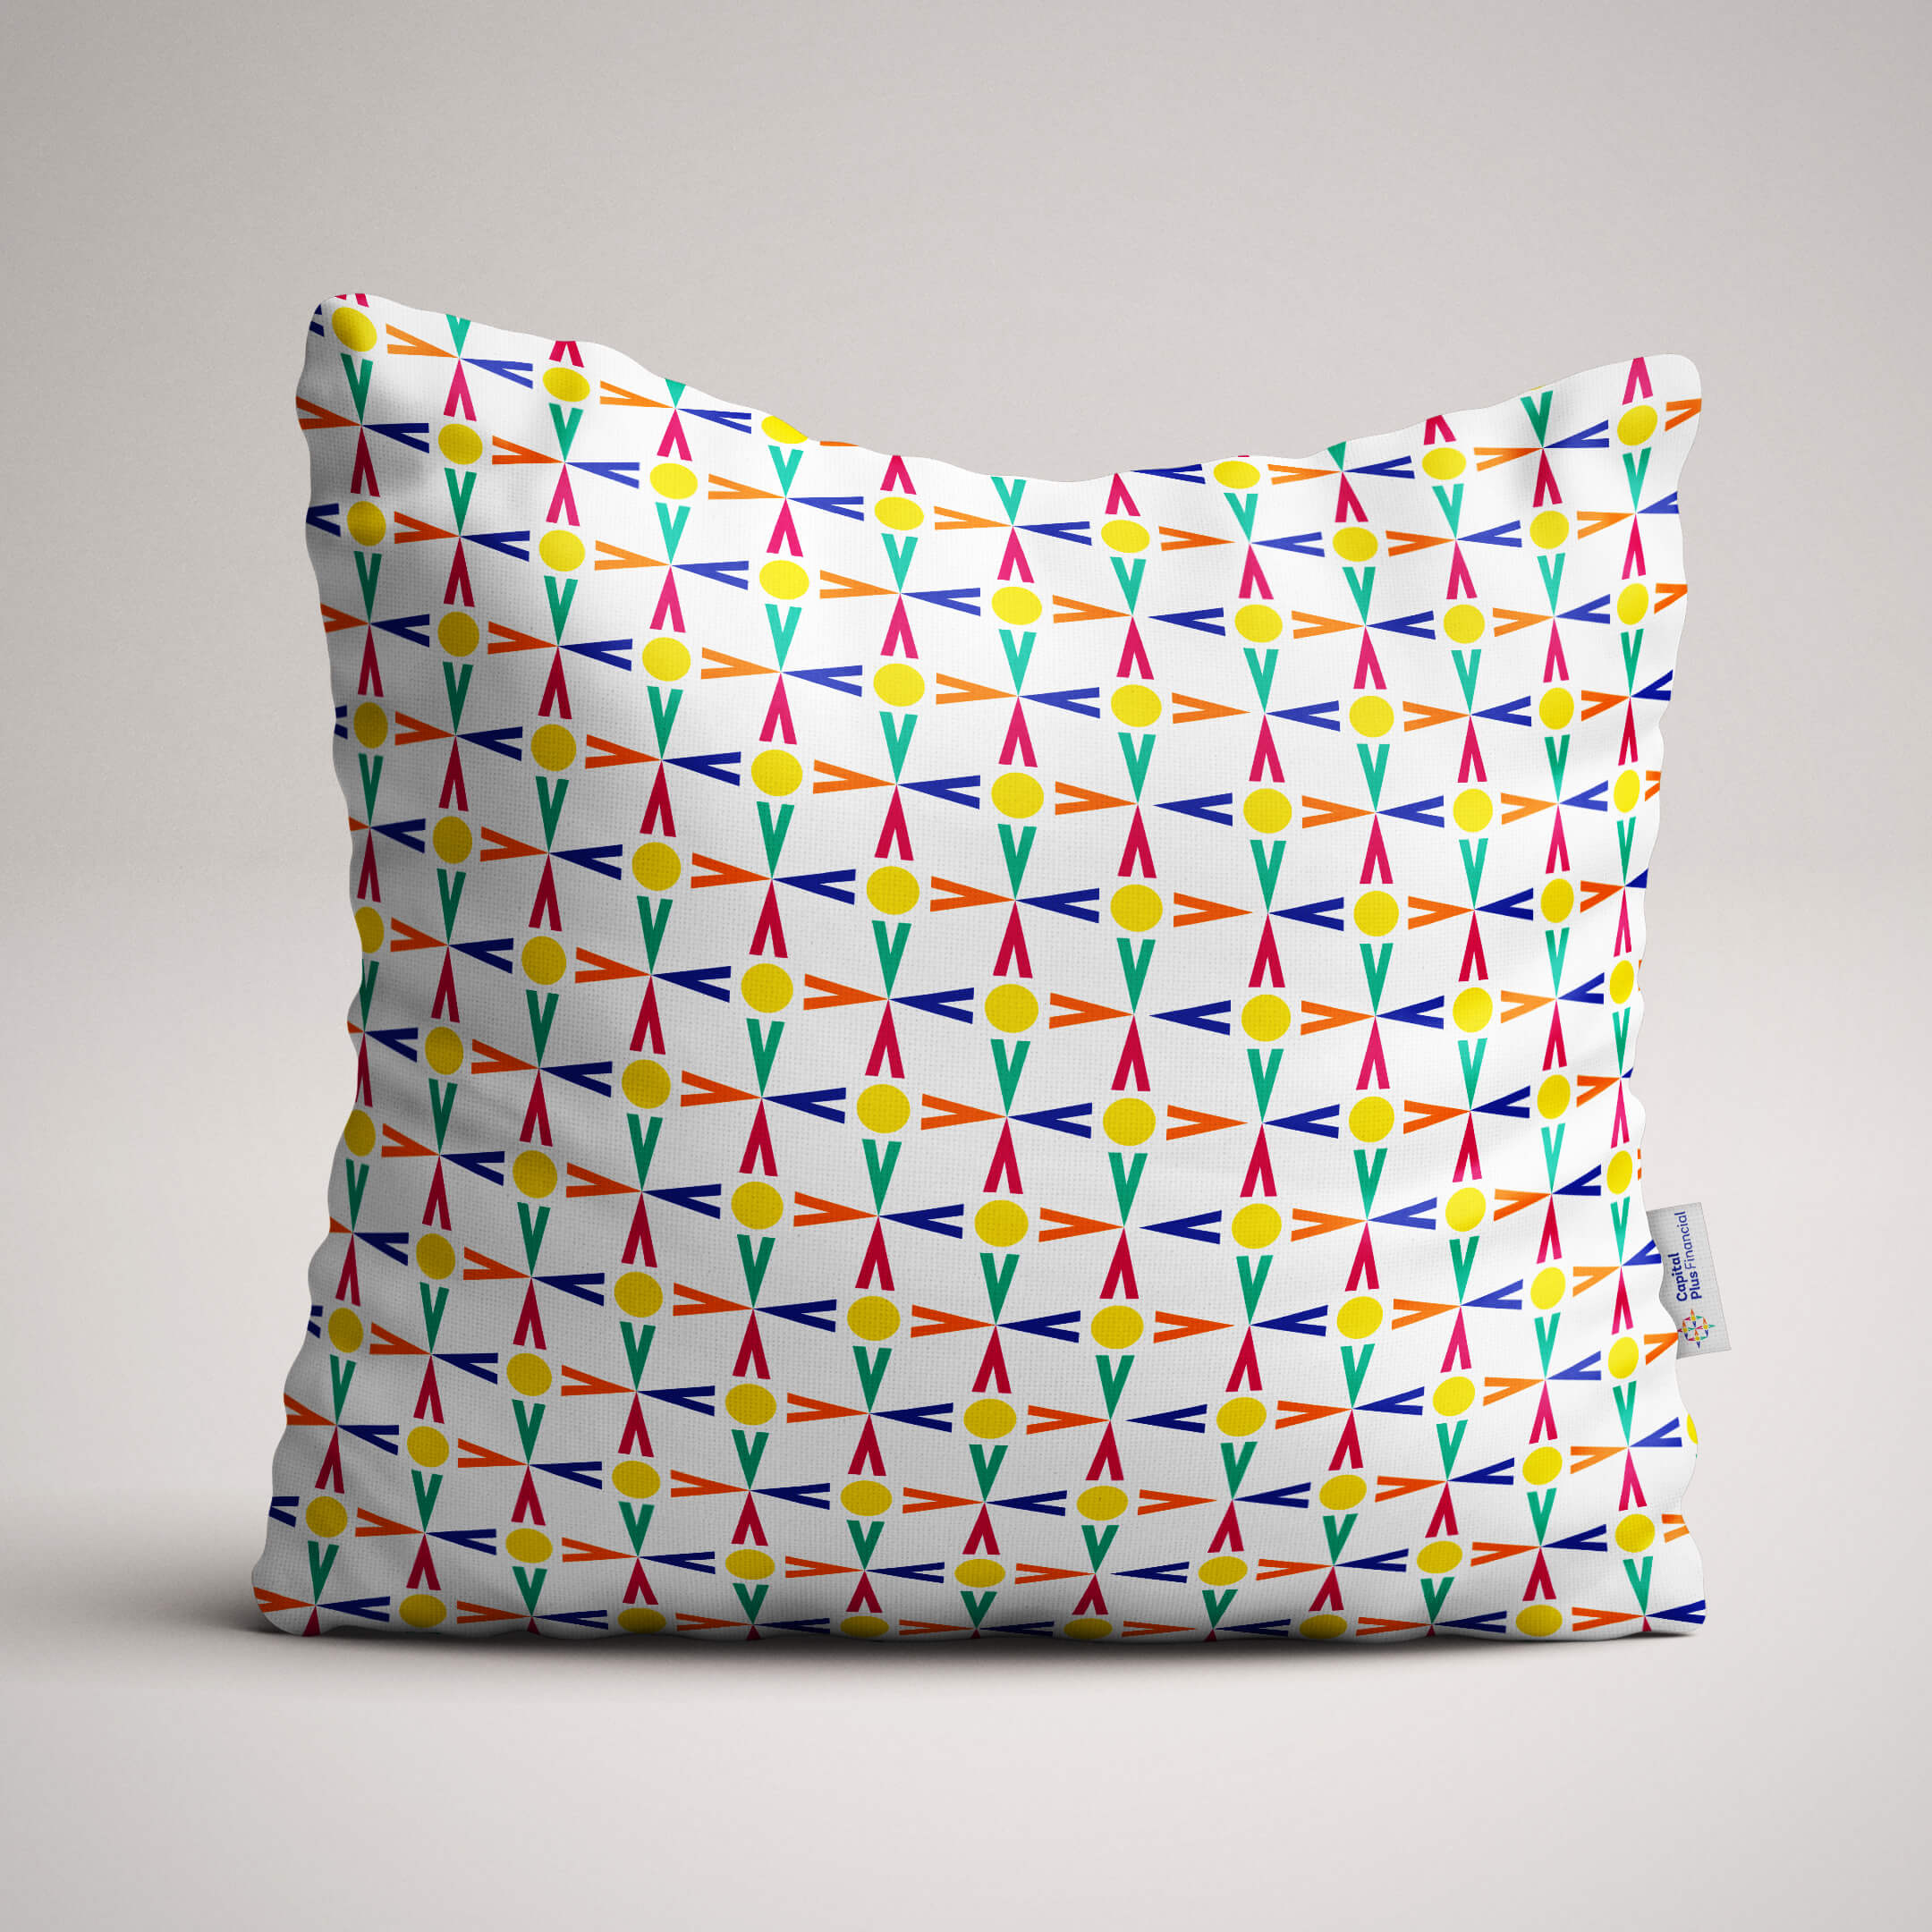 Example of branding applied to throw pillow